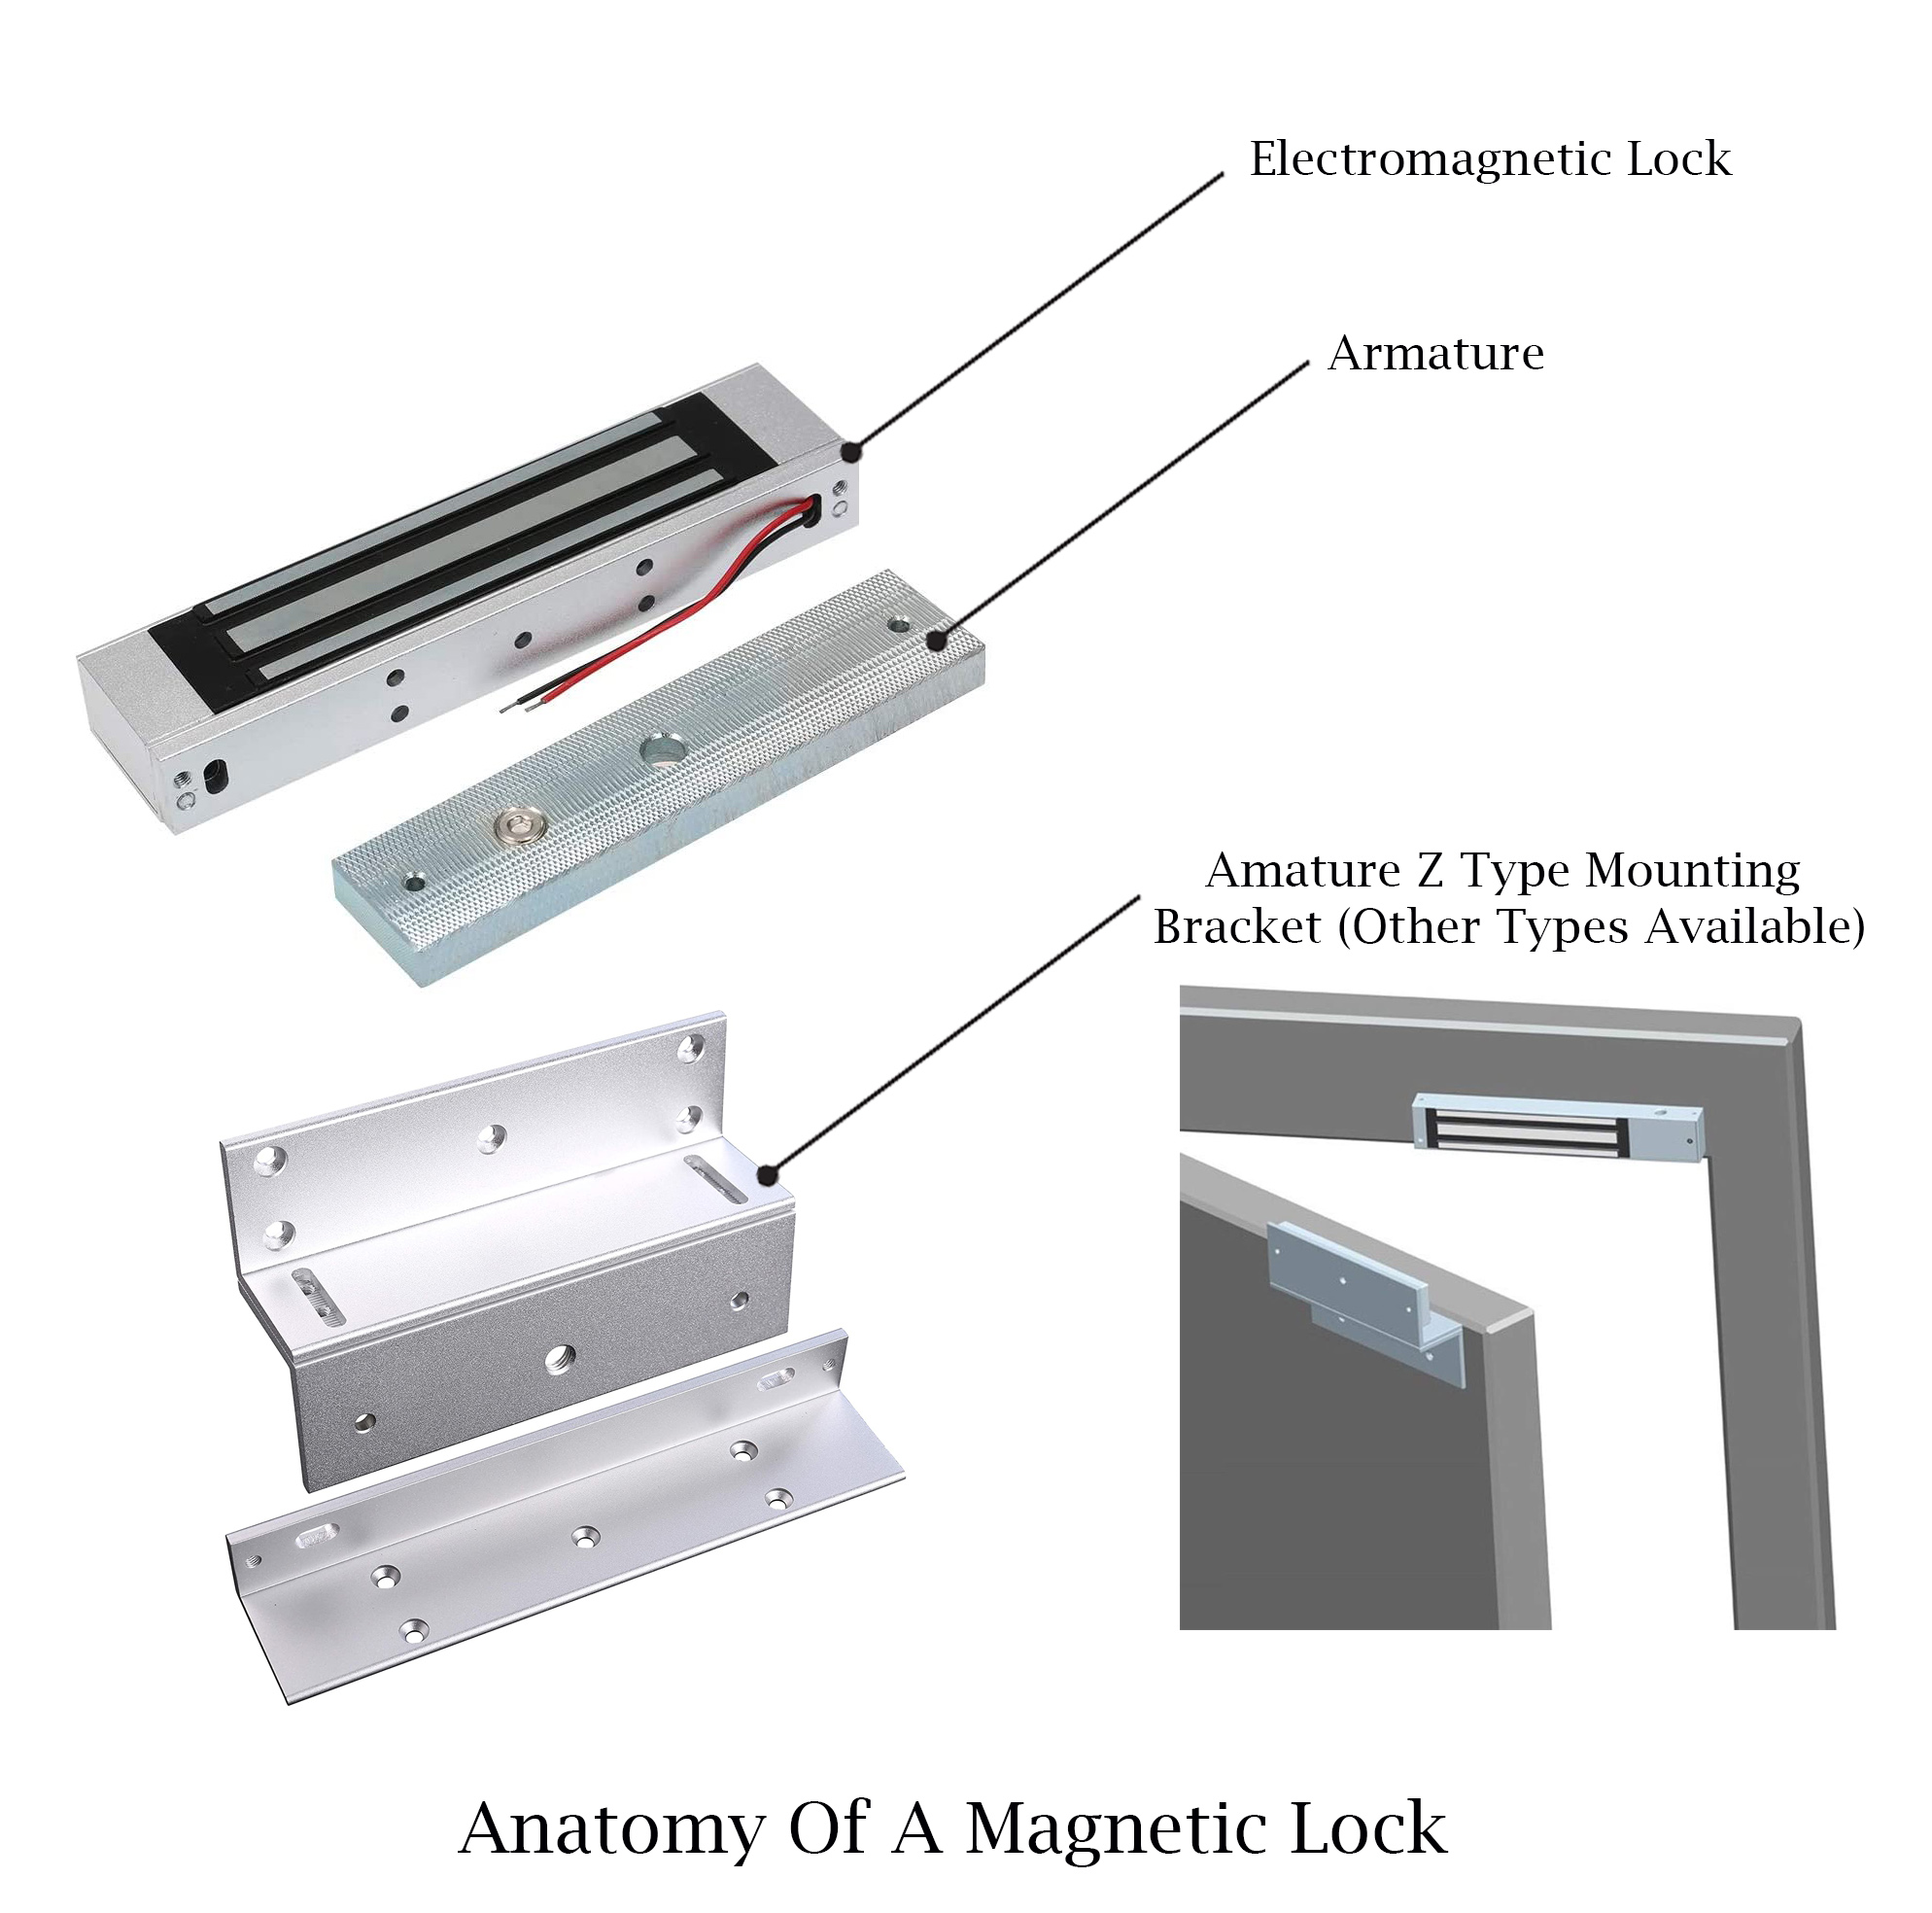 How To Apply Magnetic Wall Pins – Step by Step Guide - FIRST4MAGNETS®, BLOG